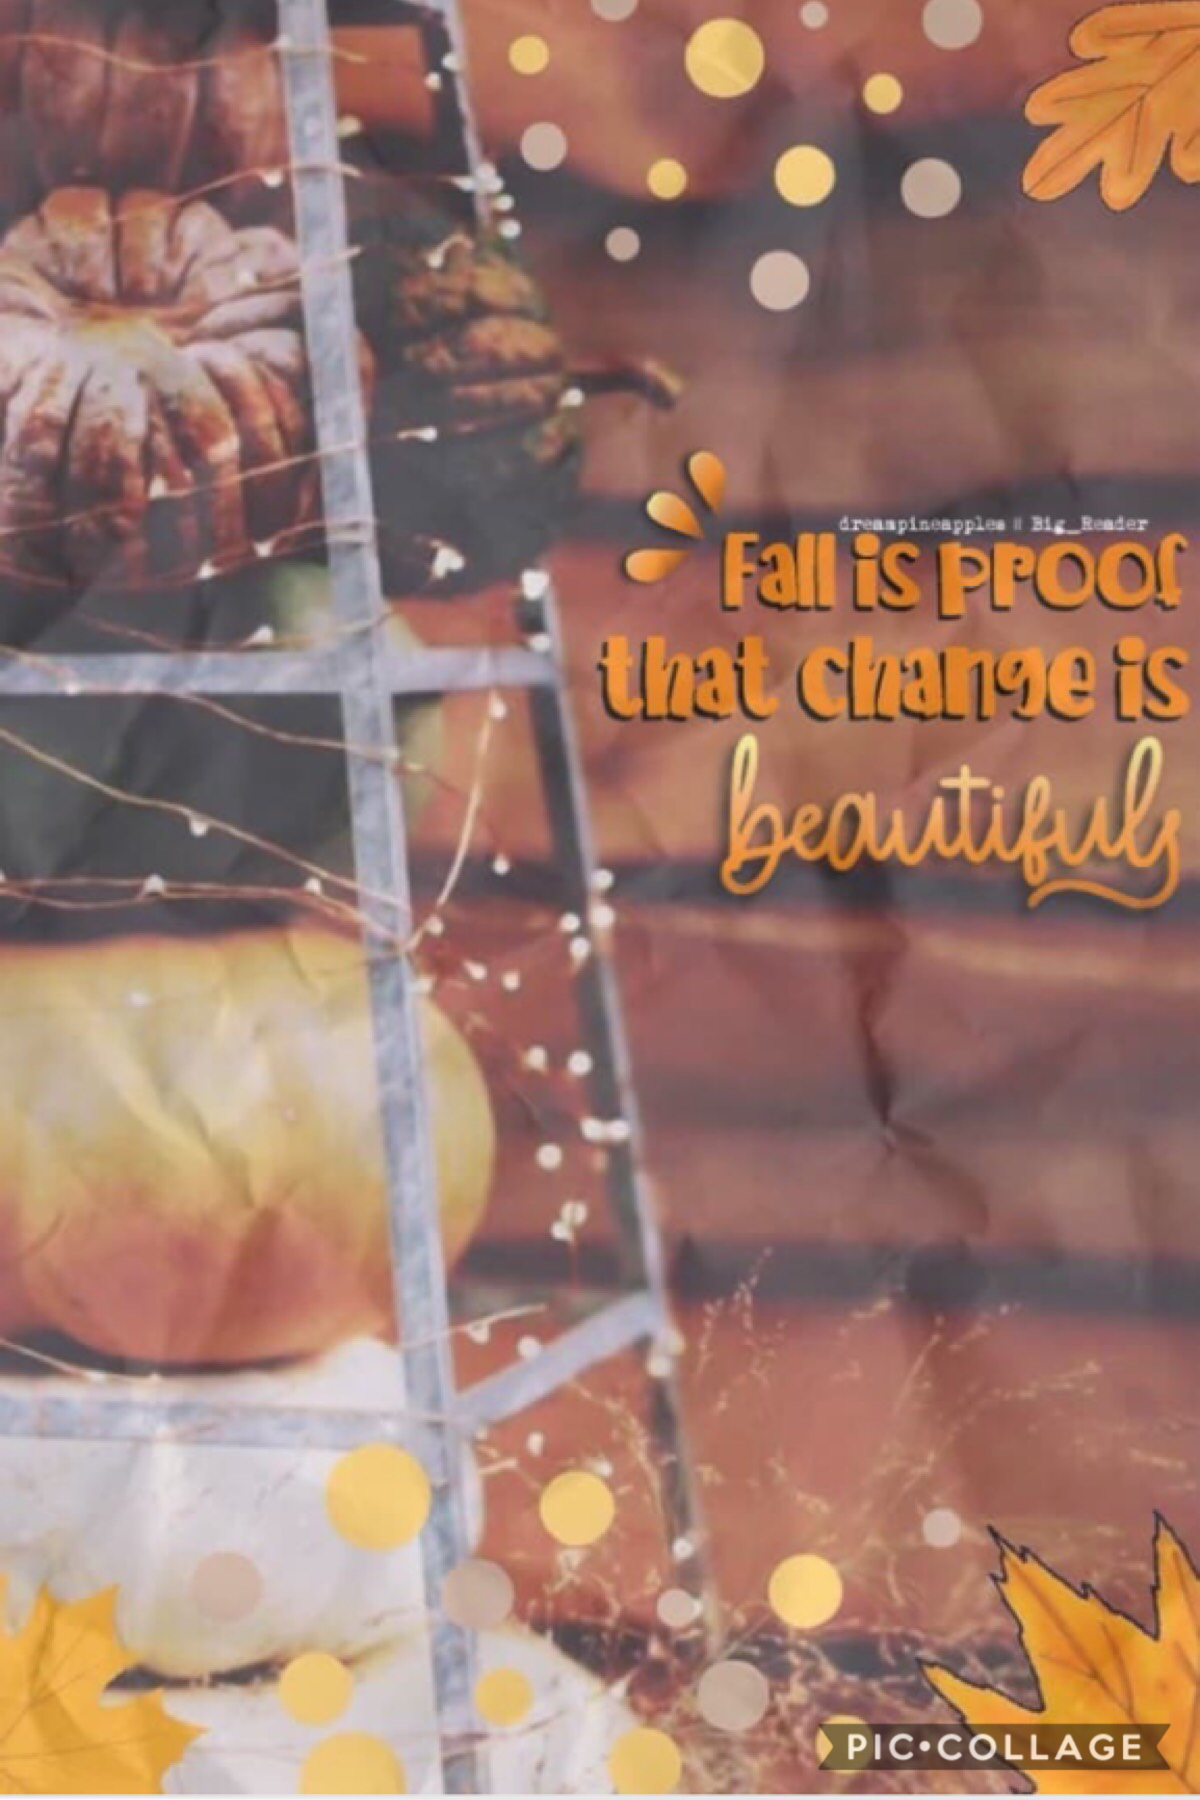 Fall Collab with the one and only....
DreamPineapples !!!! 🍍 
Love how this turned out!! 
I did the background, and she did the text, and we both did pngs !! 🍂😄 hope everyone is having a great day!!